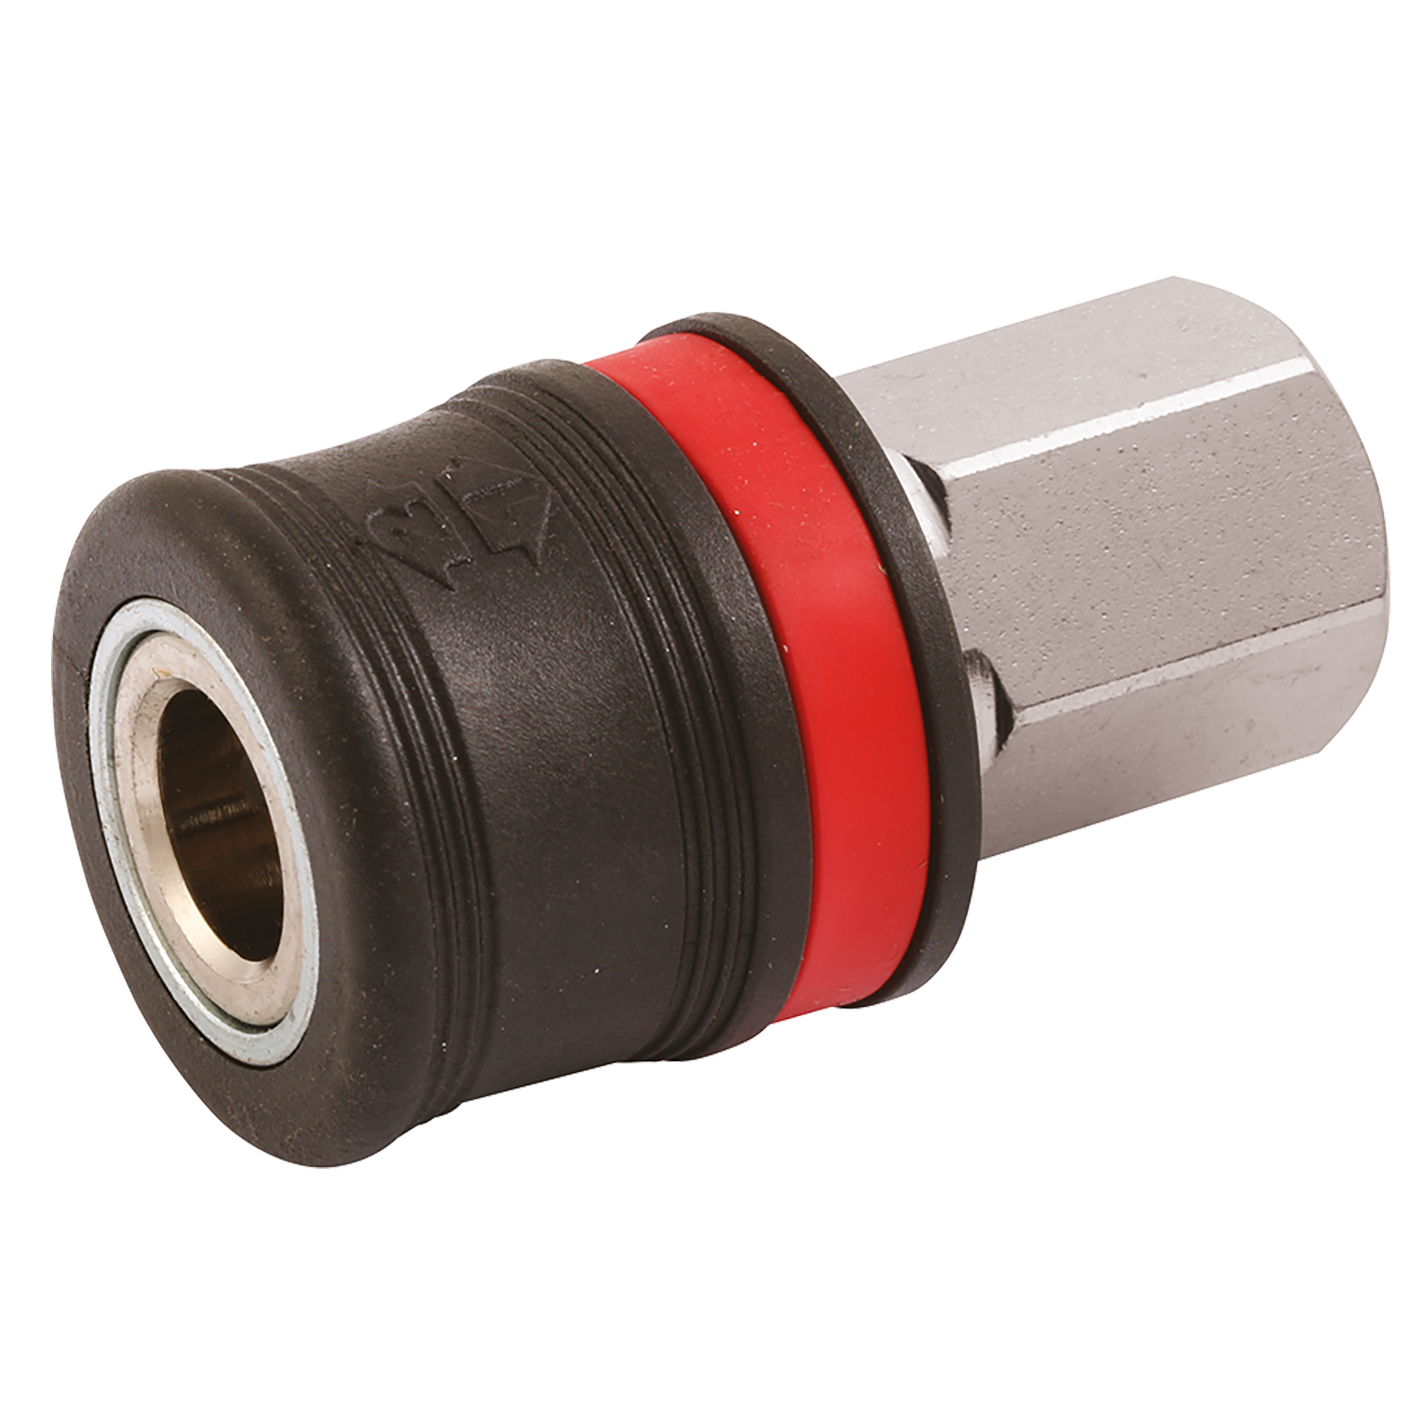 1/4" BSPP Female Safety Coupling